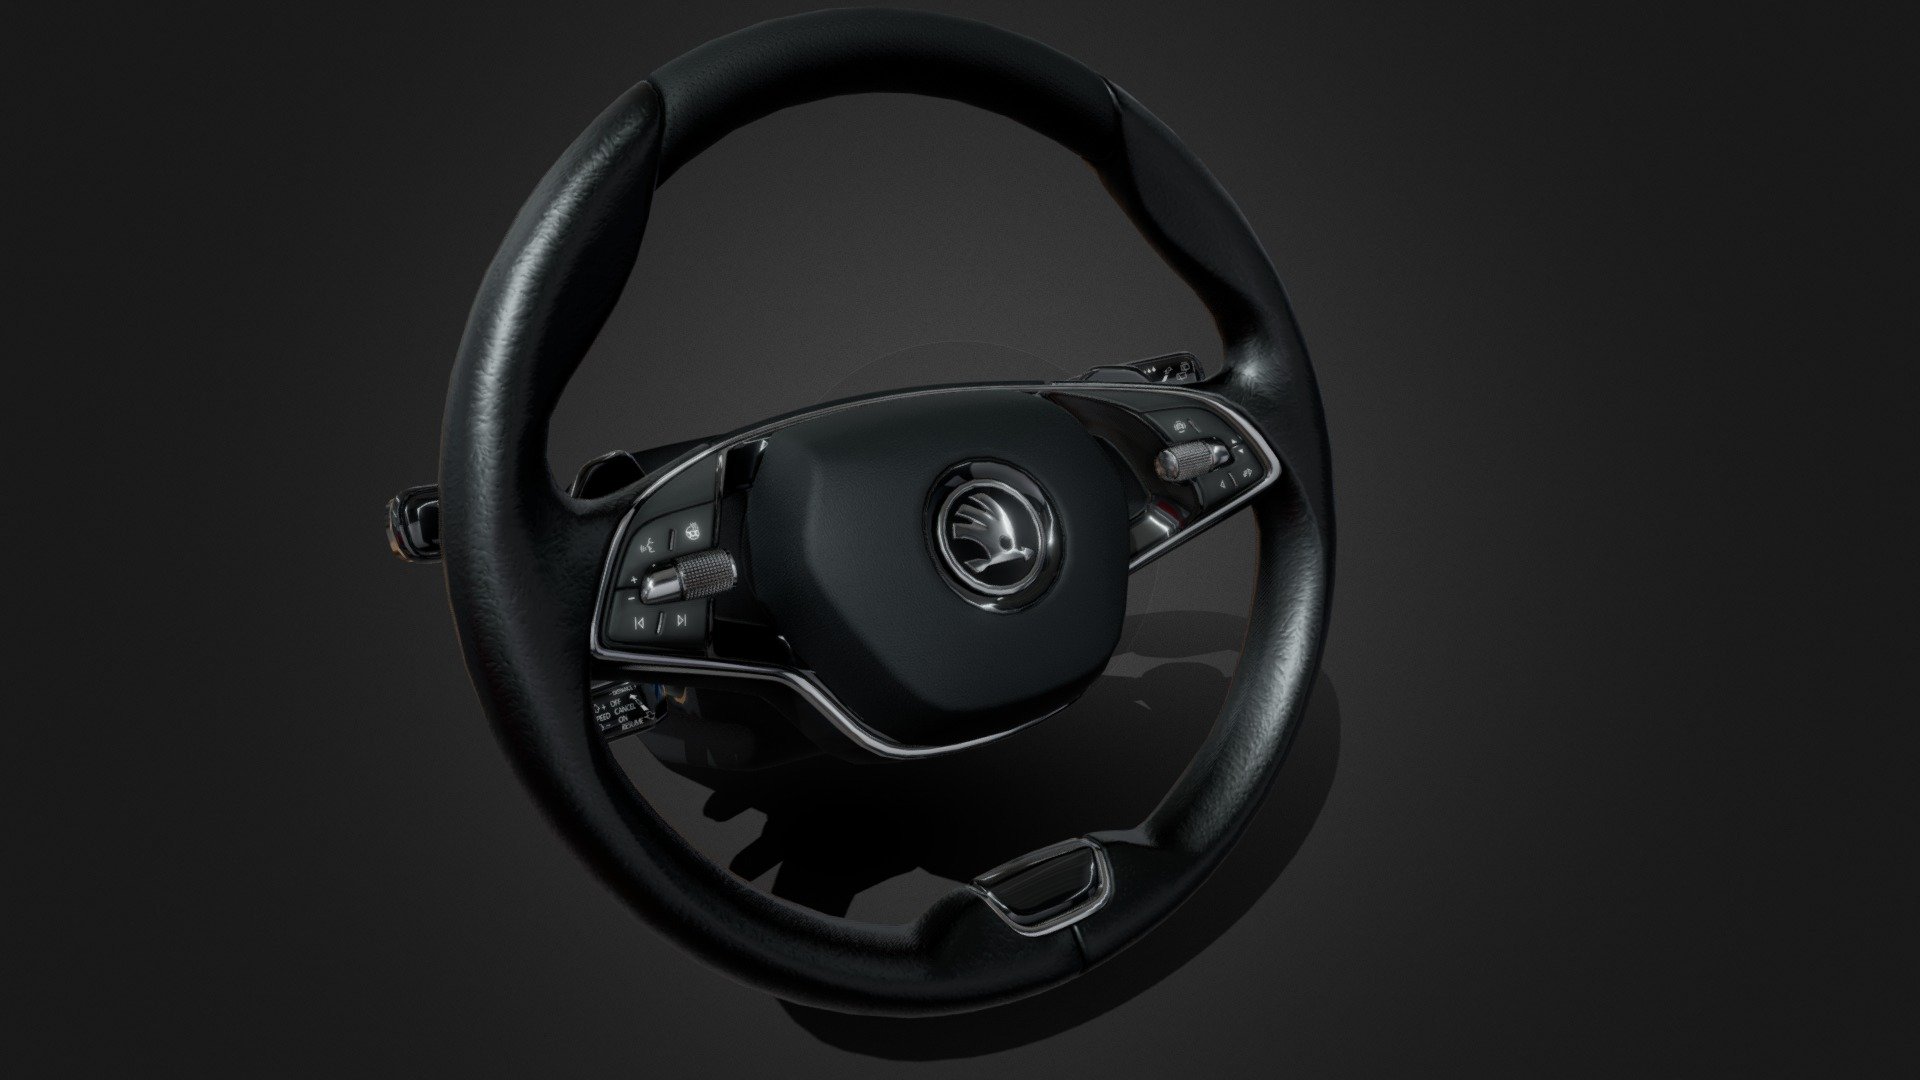 Hi!
This is the steering wheel of a Škoda car.
I made the model very detailed and so it fits into the interior for very accurate visualizations 3d model